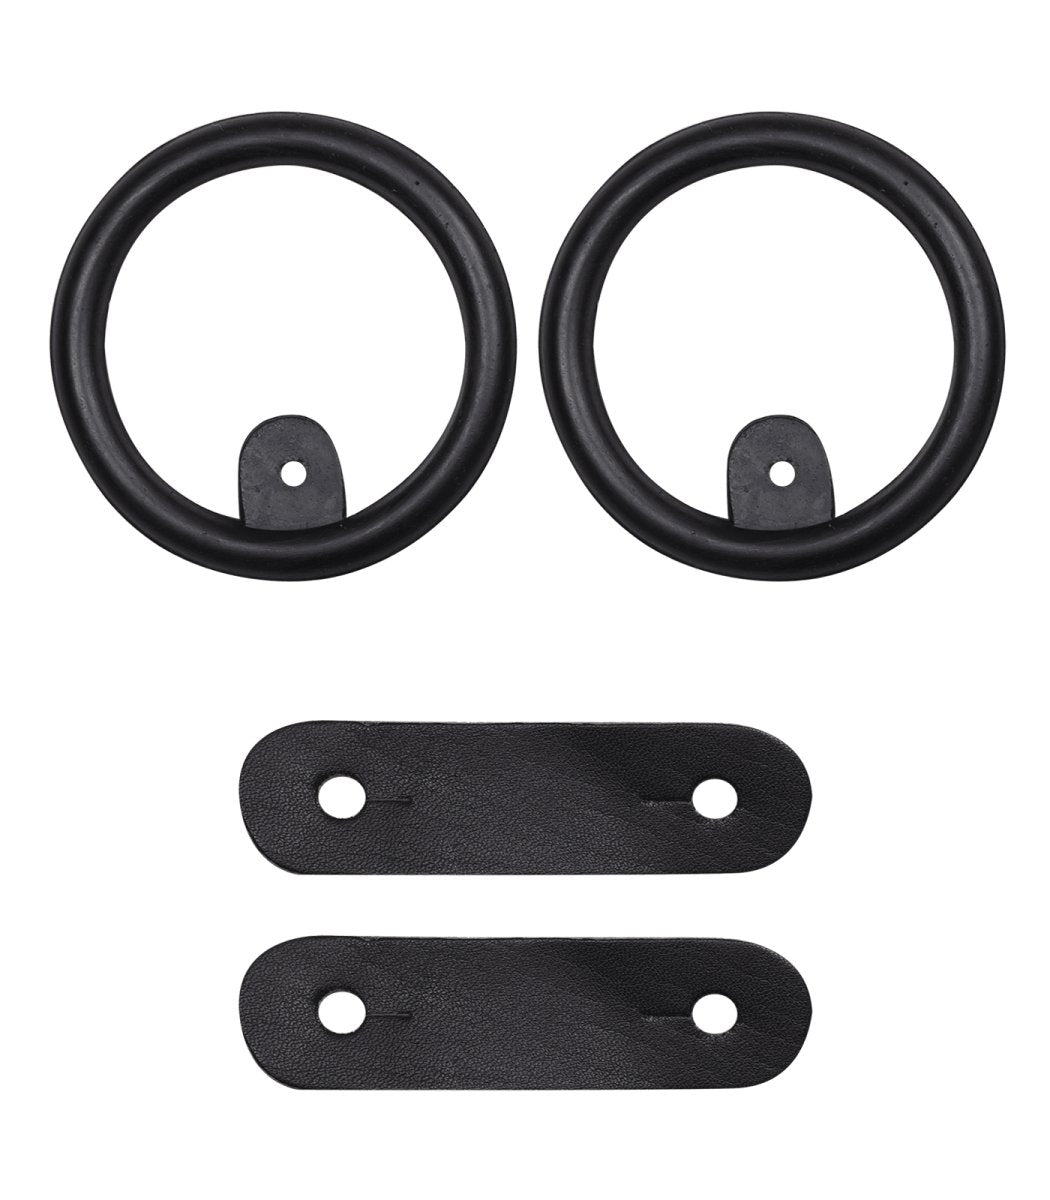 rubber rings and leather loops for safety stirrups - animondo.dk